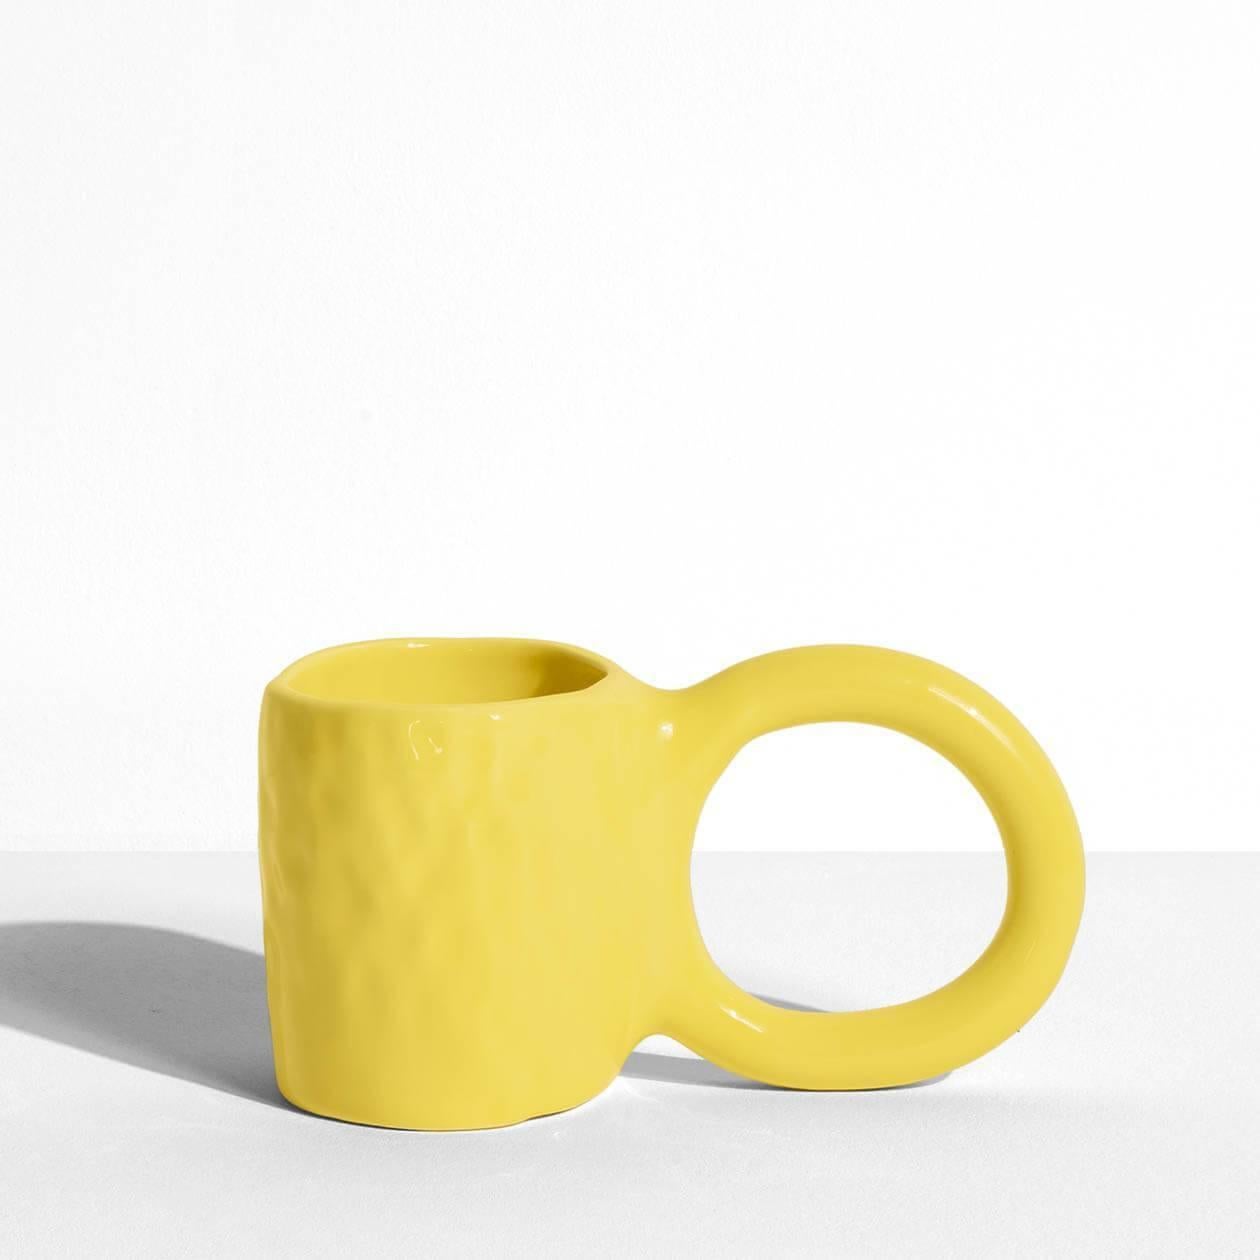 In creating the Donut collection, designer Pia Chevalier drew her inspiration from the world of baking. The ceramic artist imagined these cups and mugs as cakes – their handles representing the dough, and a varnished finish for a sugar-glazed